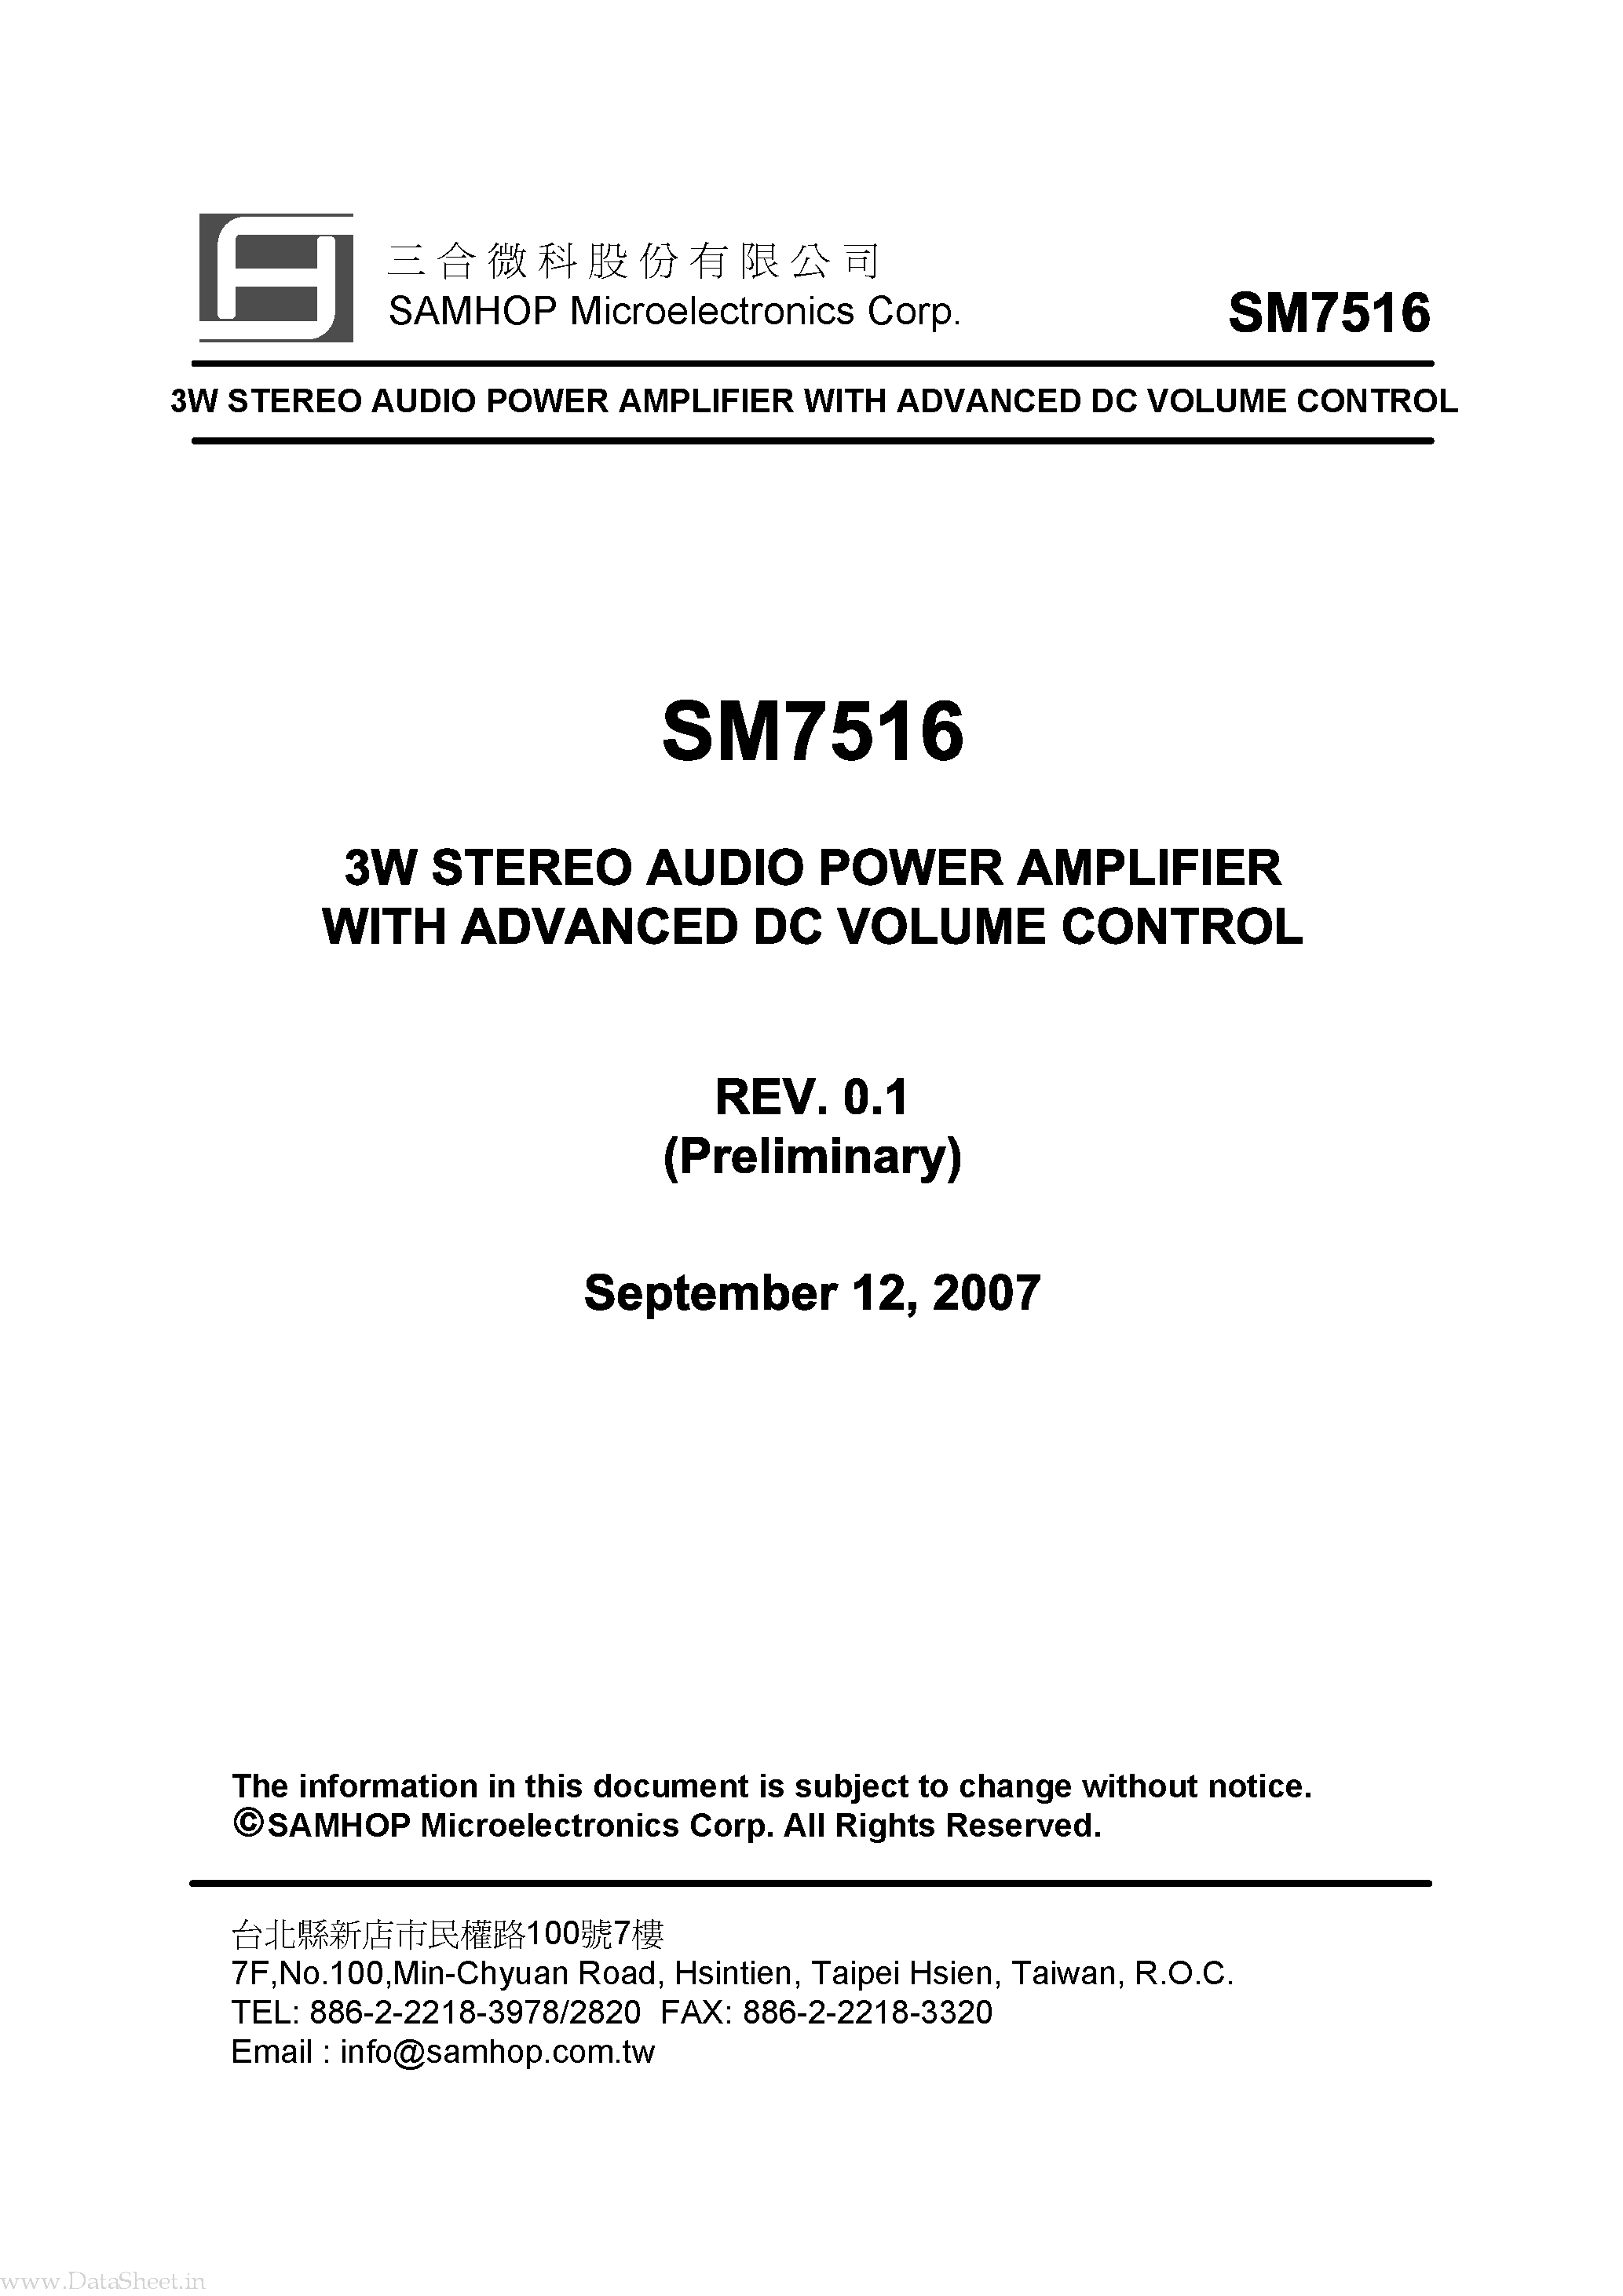 Datasheet SM7516 - 3W STEREO AUDIO POWER AMPLIFIER page 1